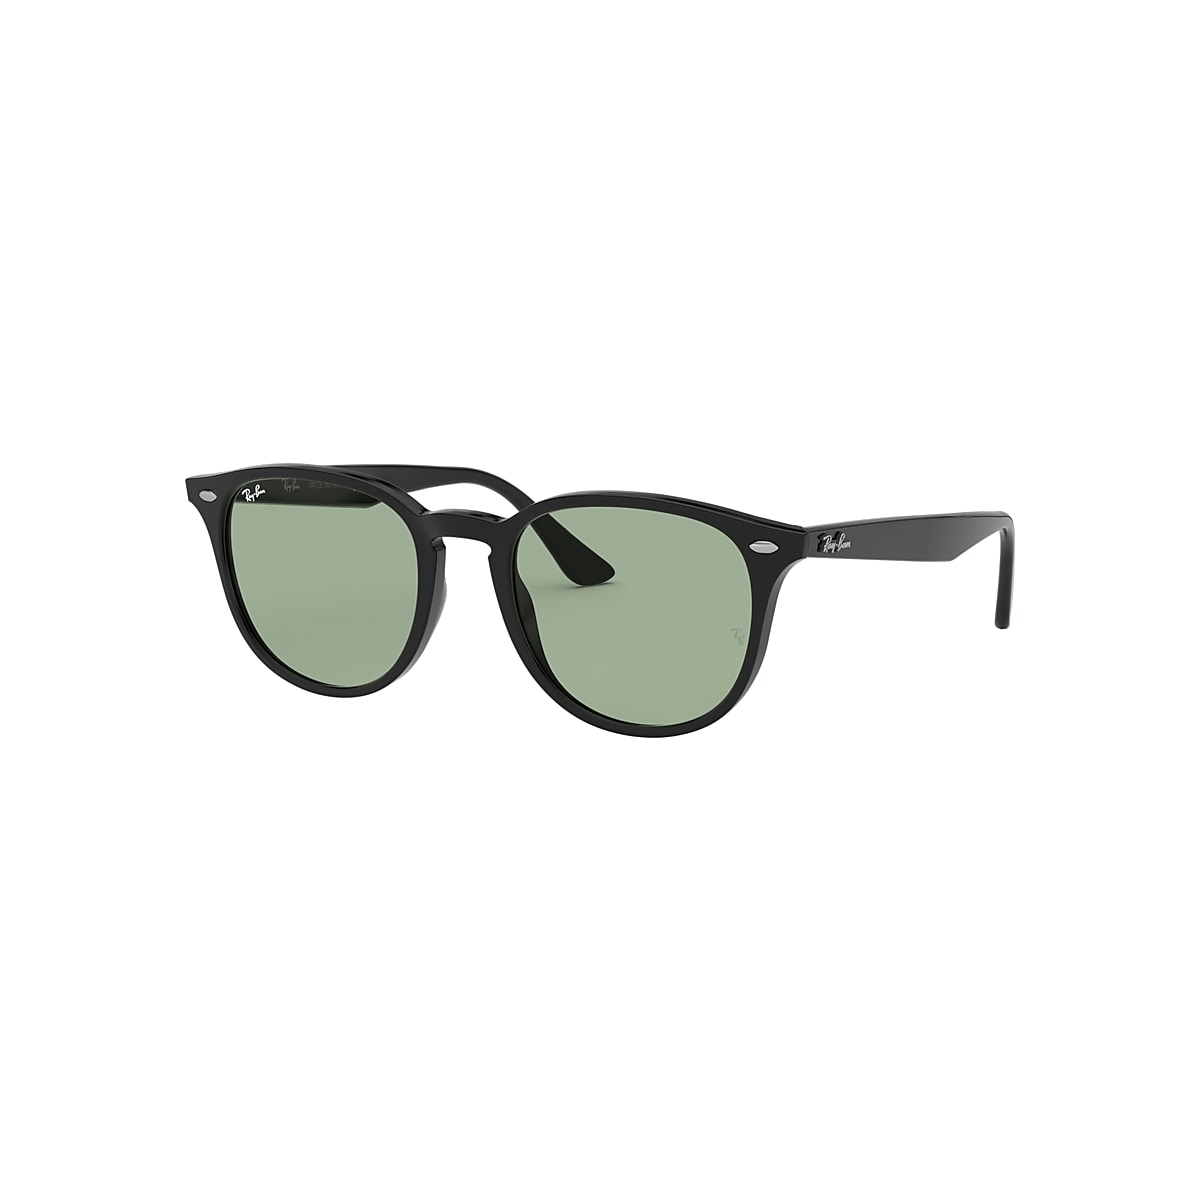 RB4259 WASHED LENSES Sunglasses in Black and Light Green 